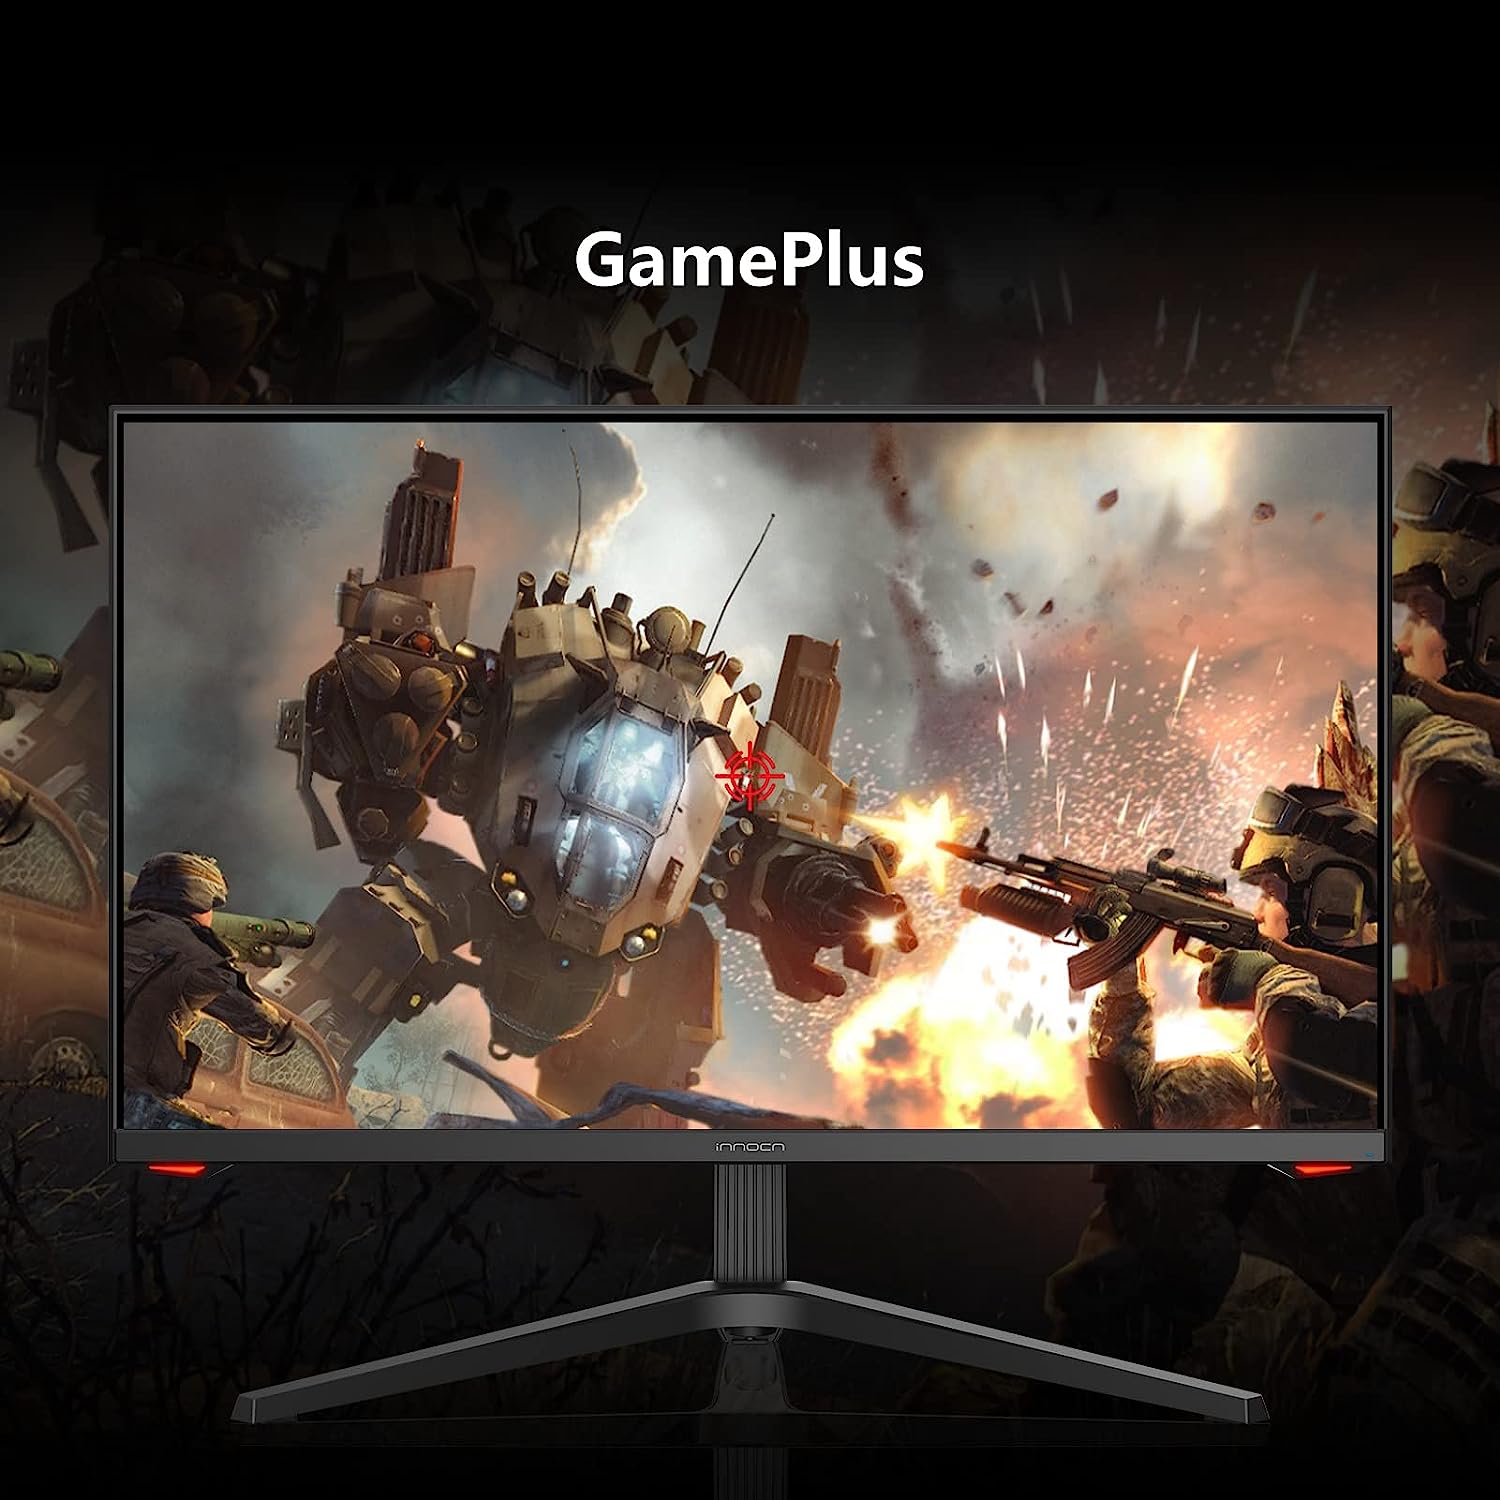 INNOCN's 27-inch beast of a gaming monitor is $120 off